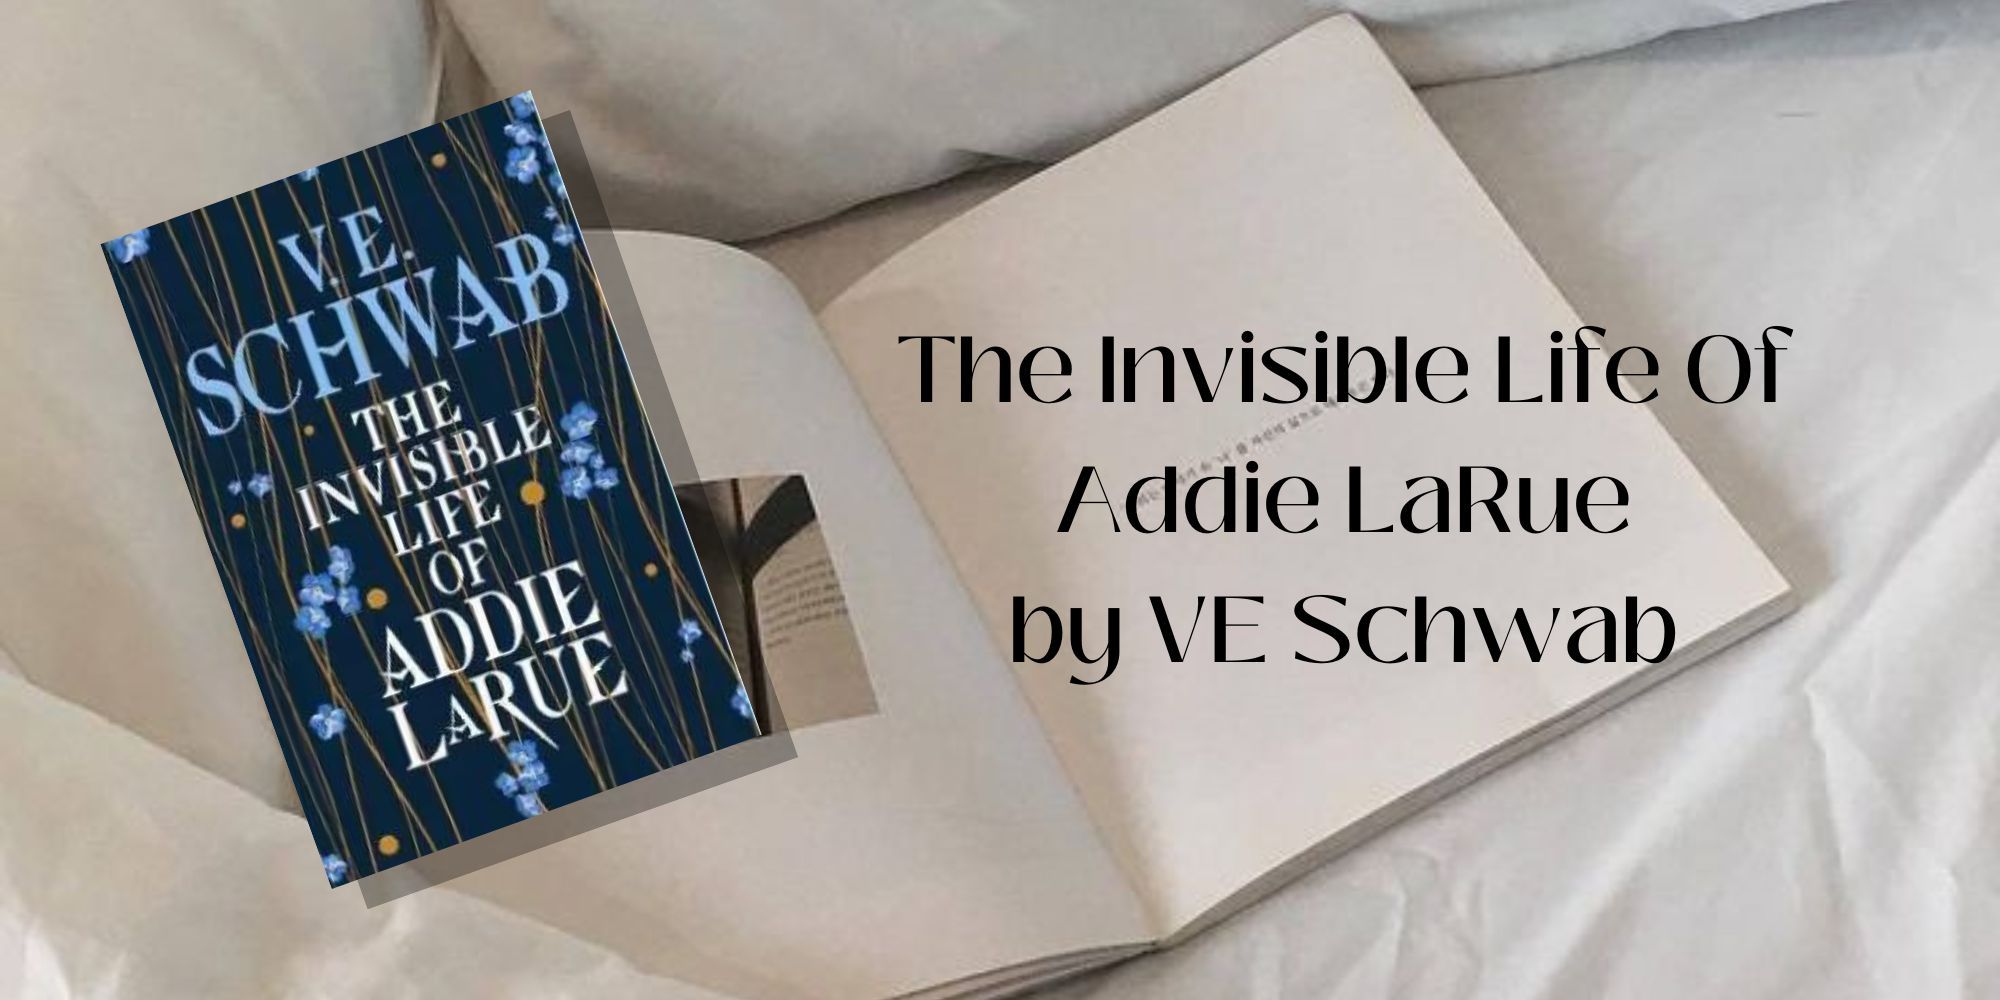 The cover of The Invisible Life Of Addie LaRue by VE Schwab